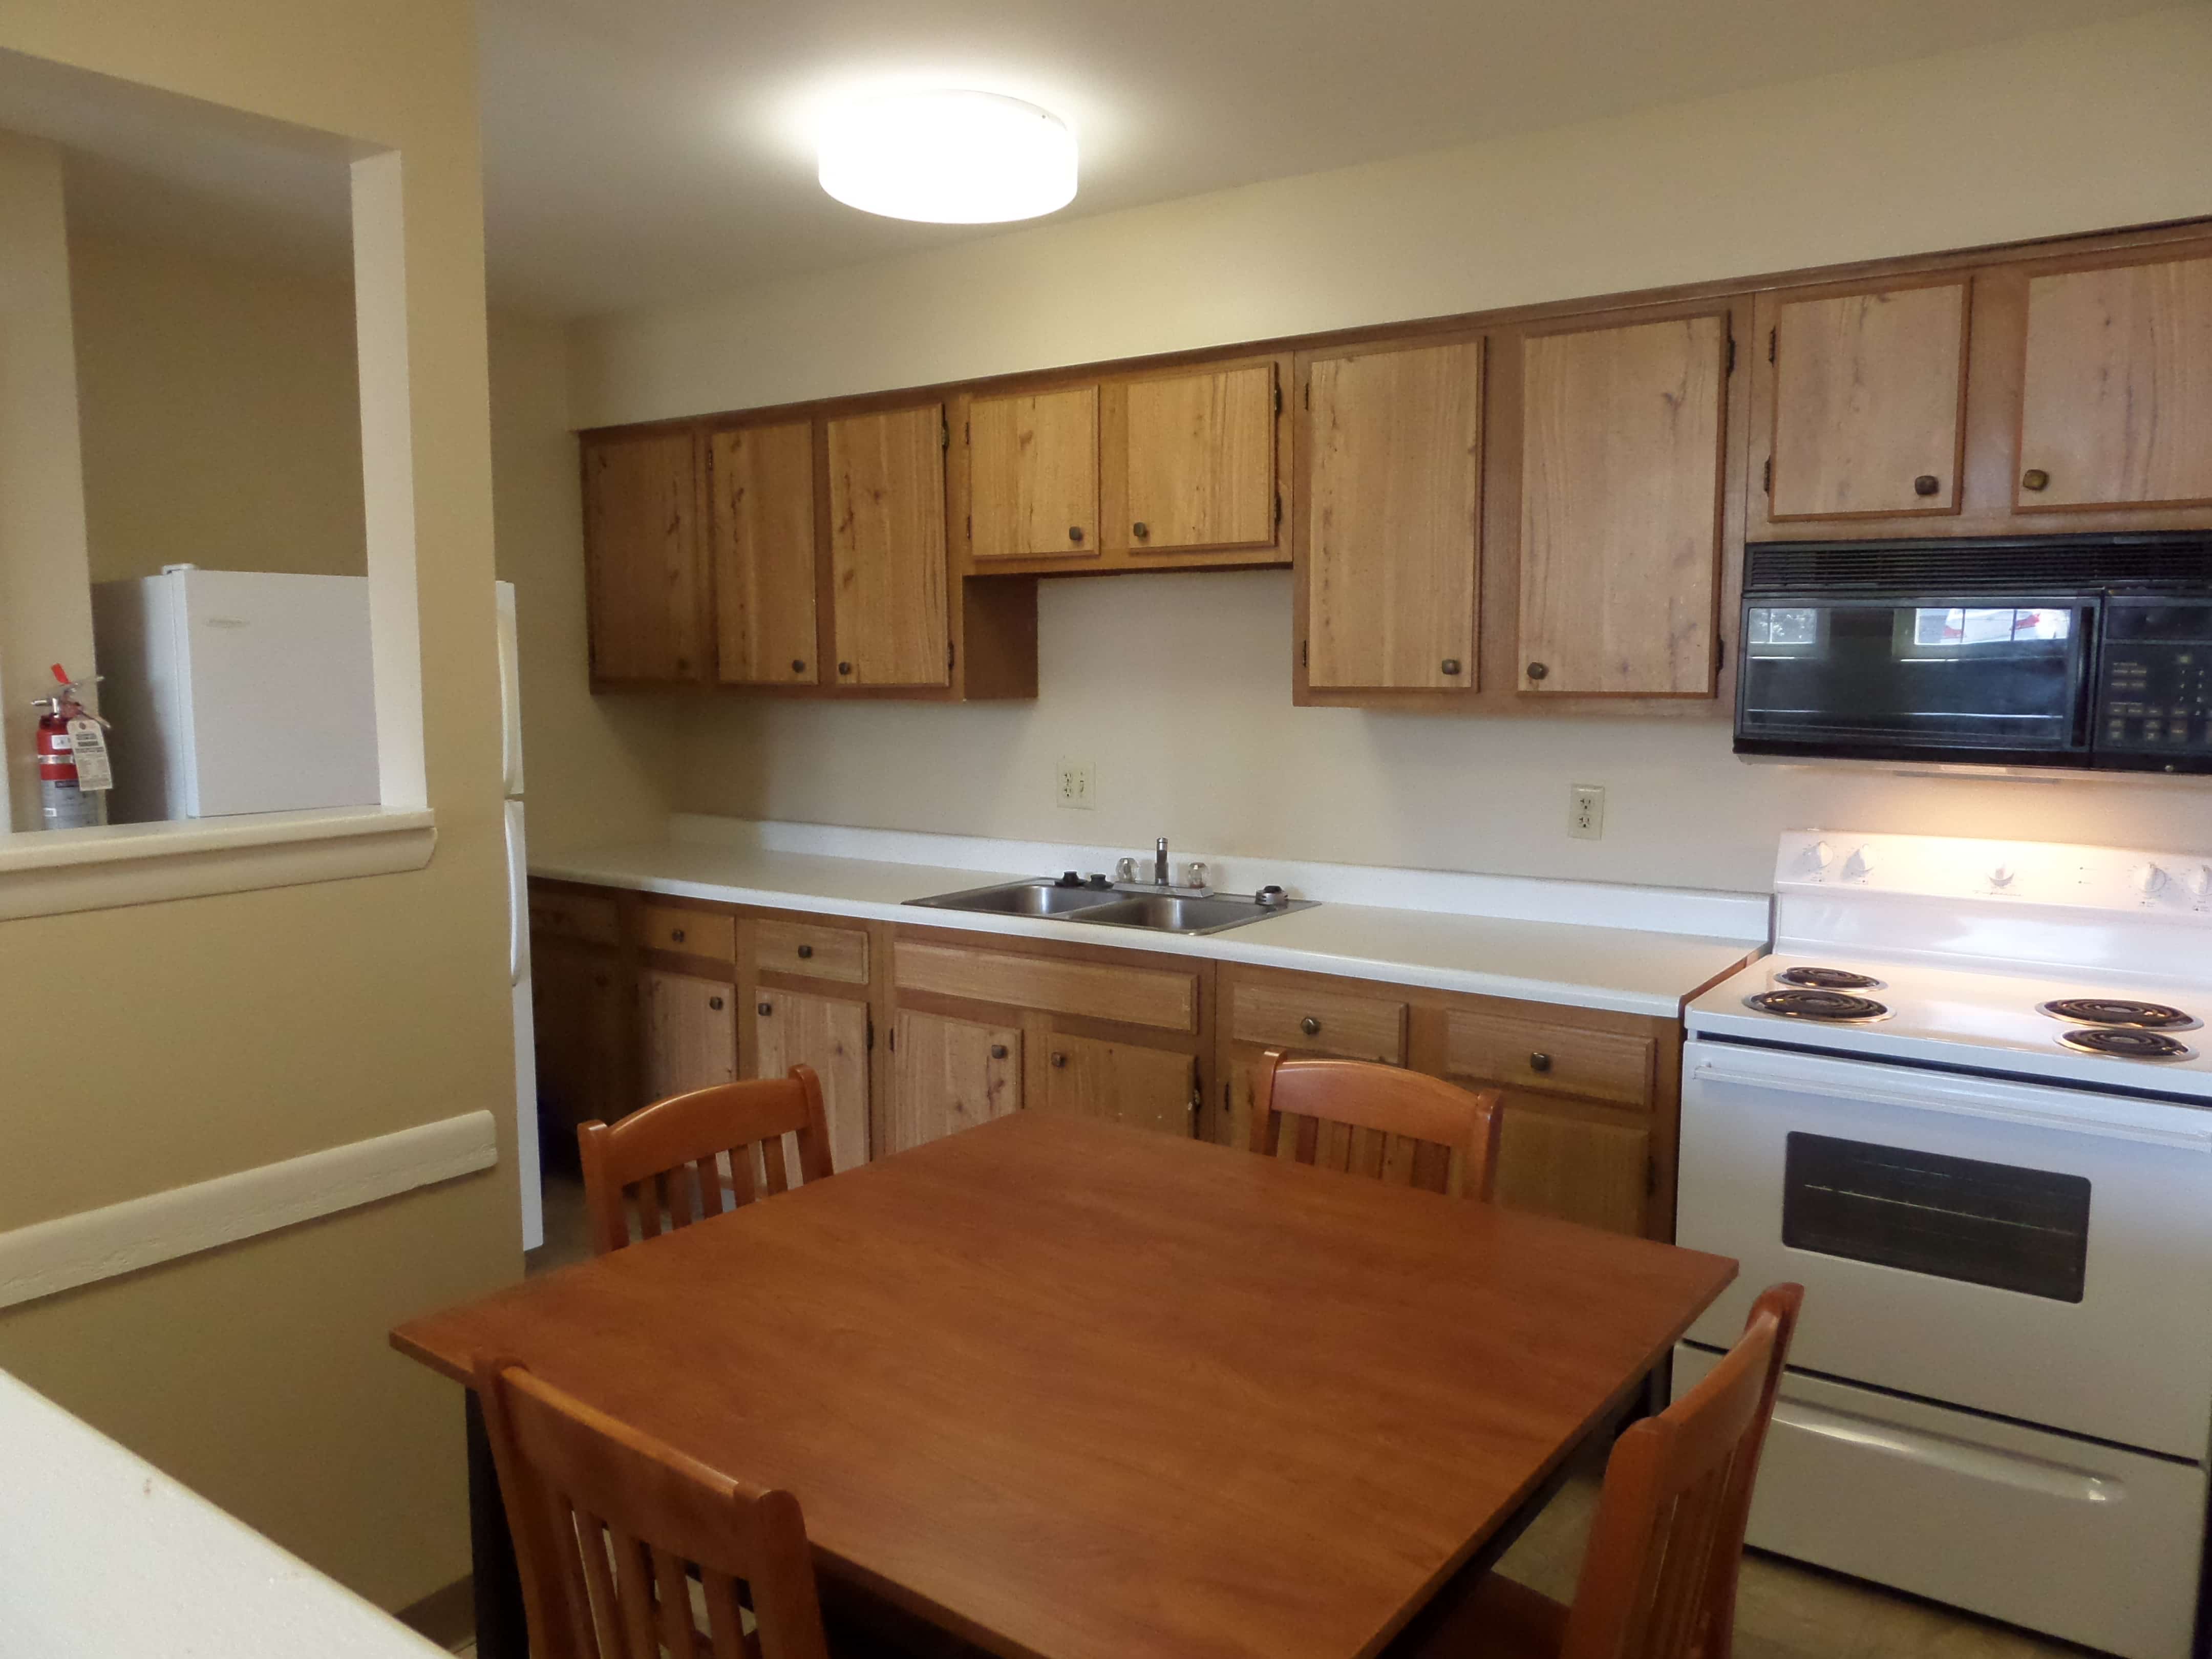 4 and 6 person units with full kitchen and dining